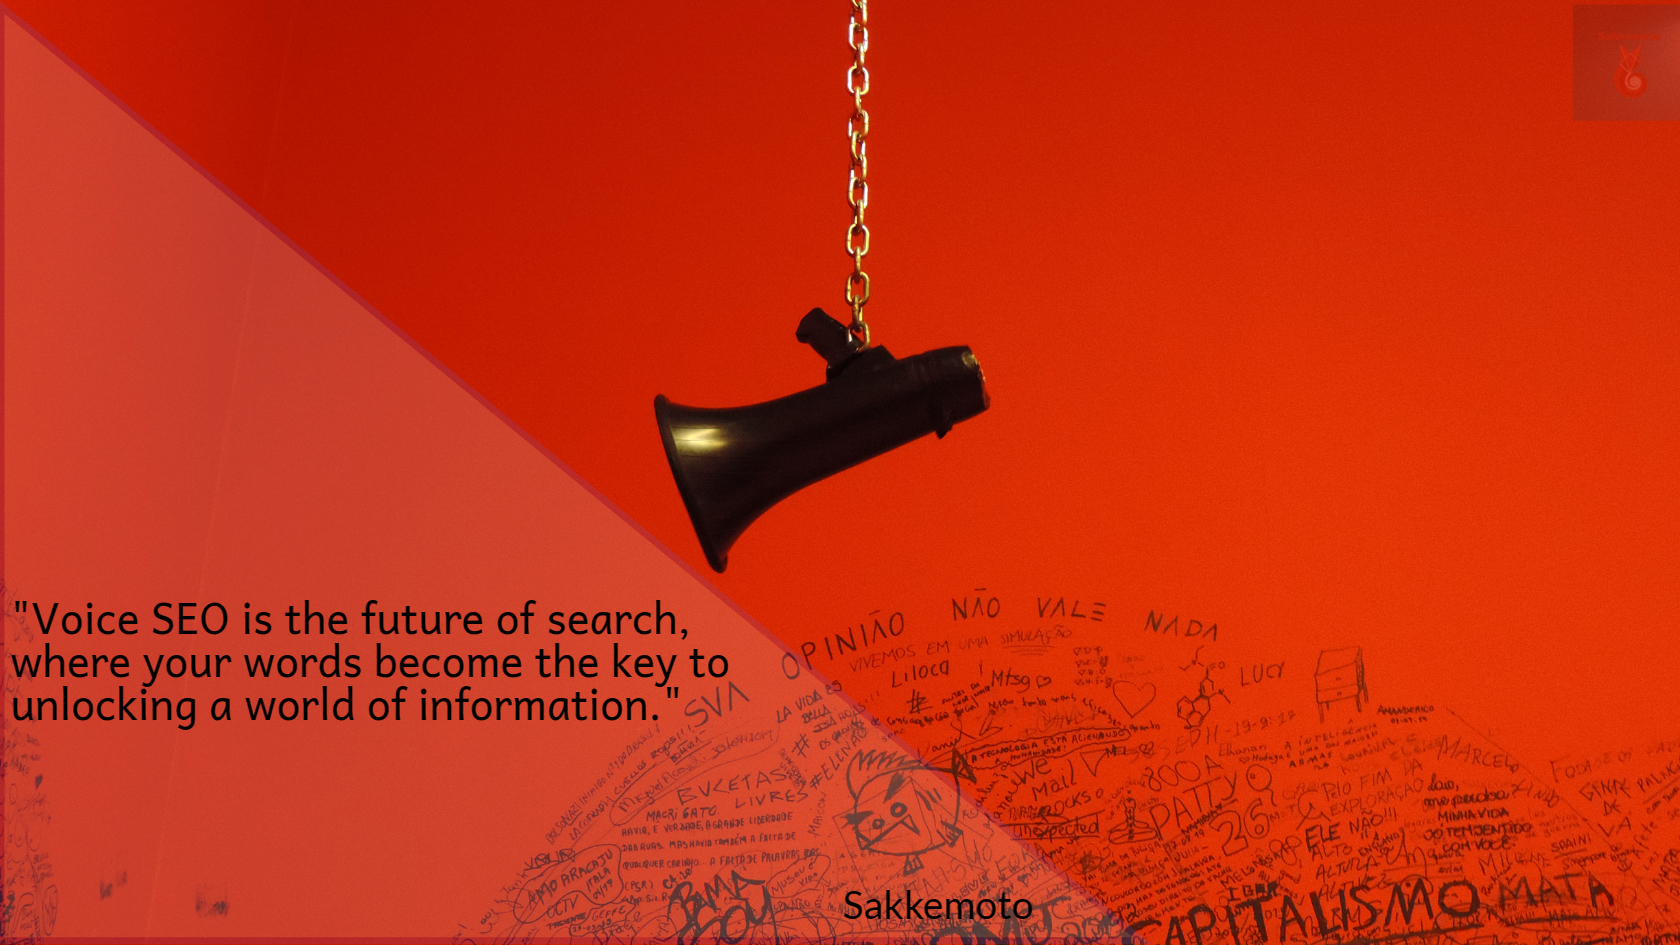 Voice SEO is the future of search, where your words become the key to unlocking a world of information.